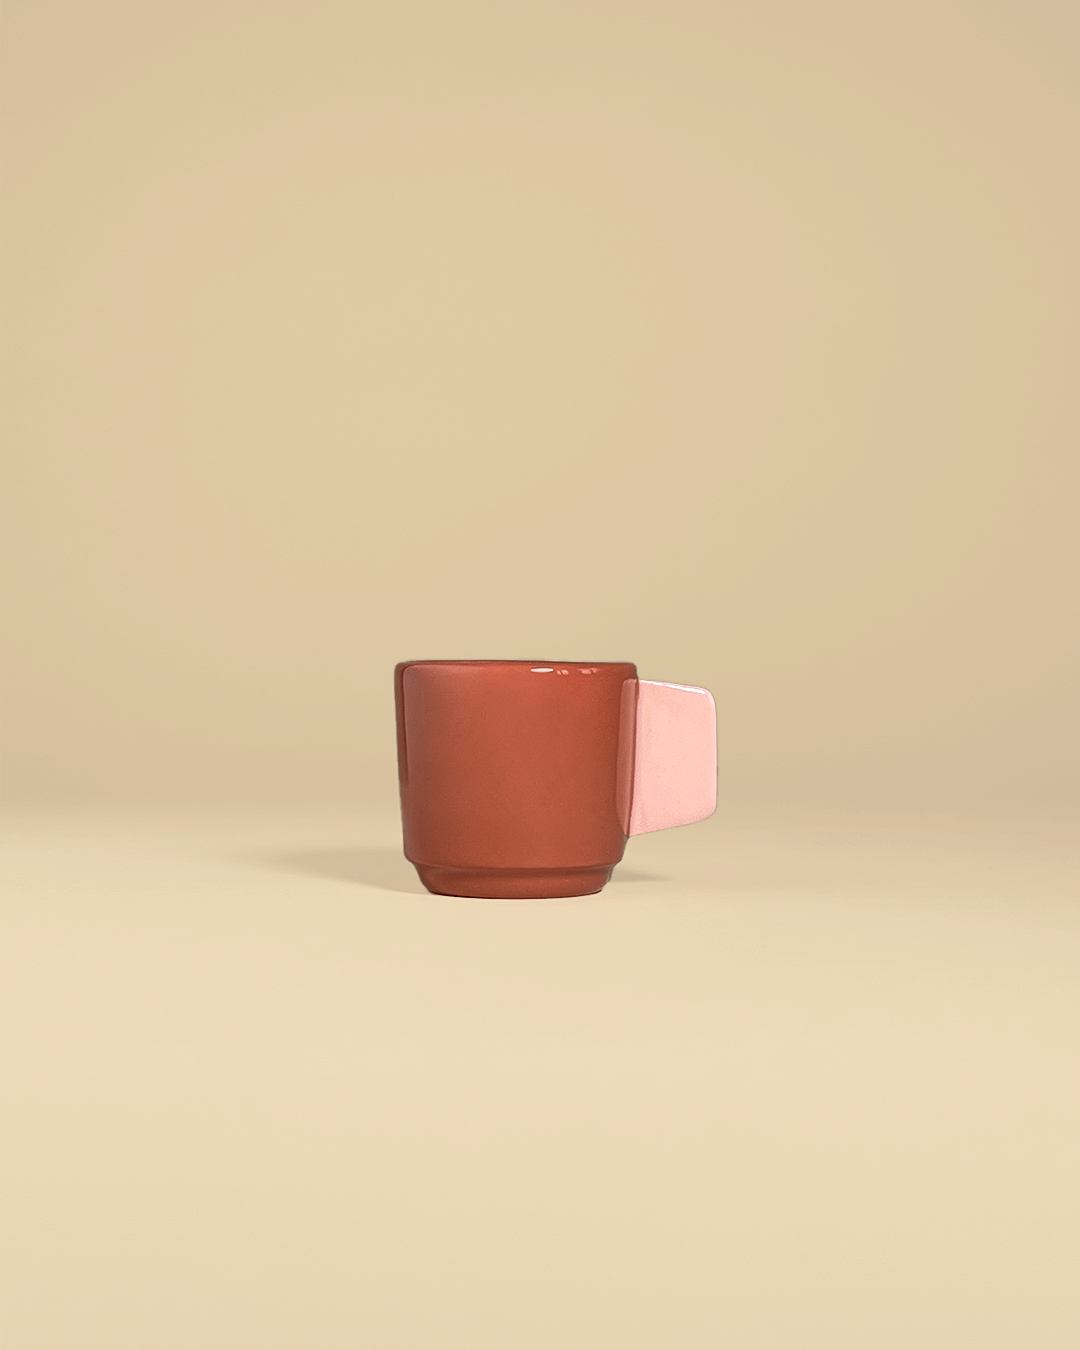 A ceramic espresso cup in terracotta and with a handle colored in powdery pink.